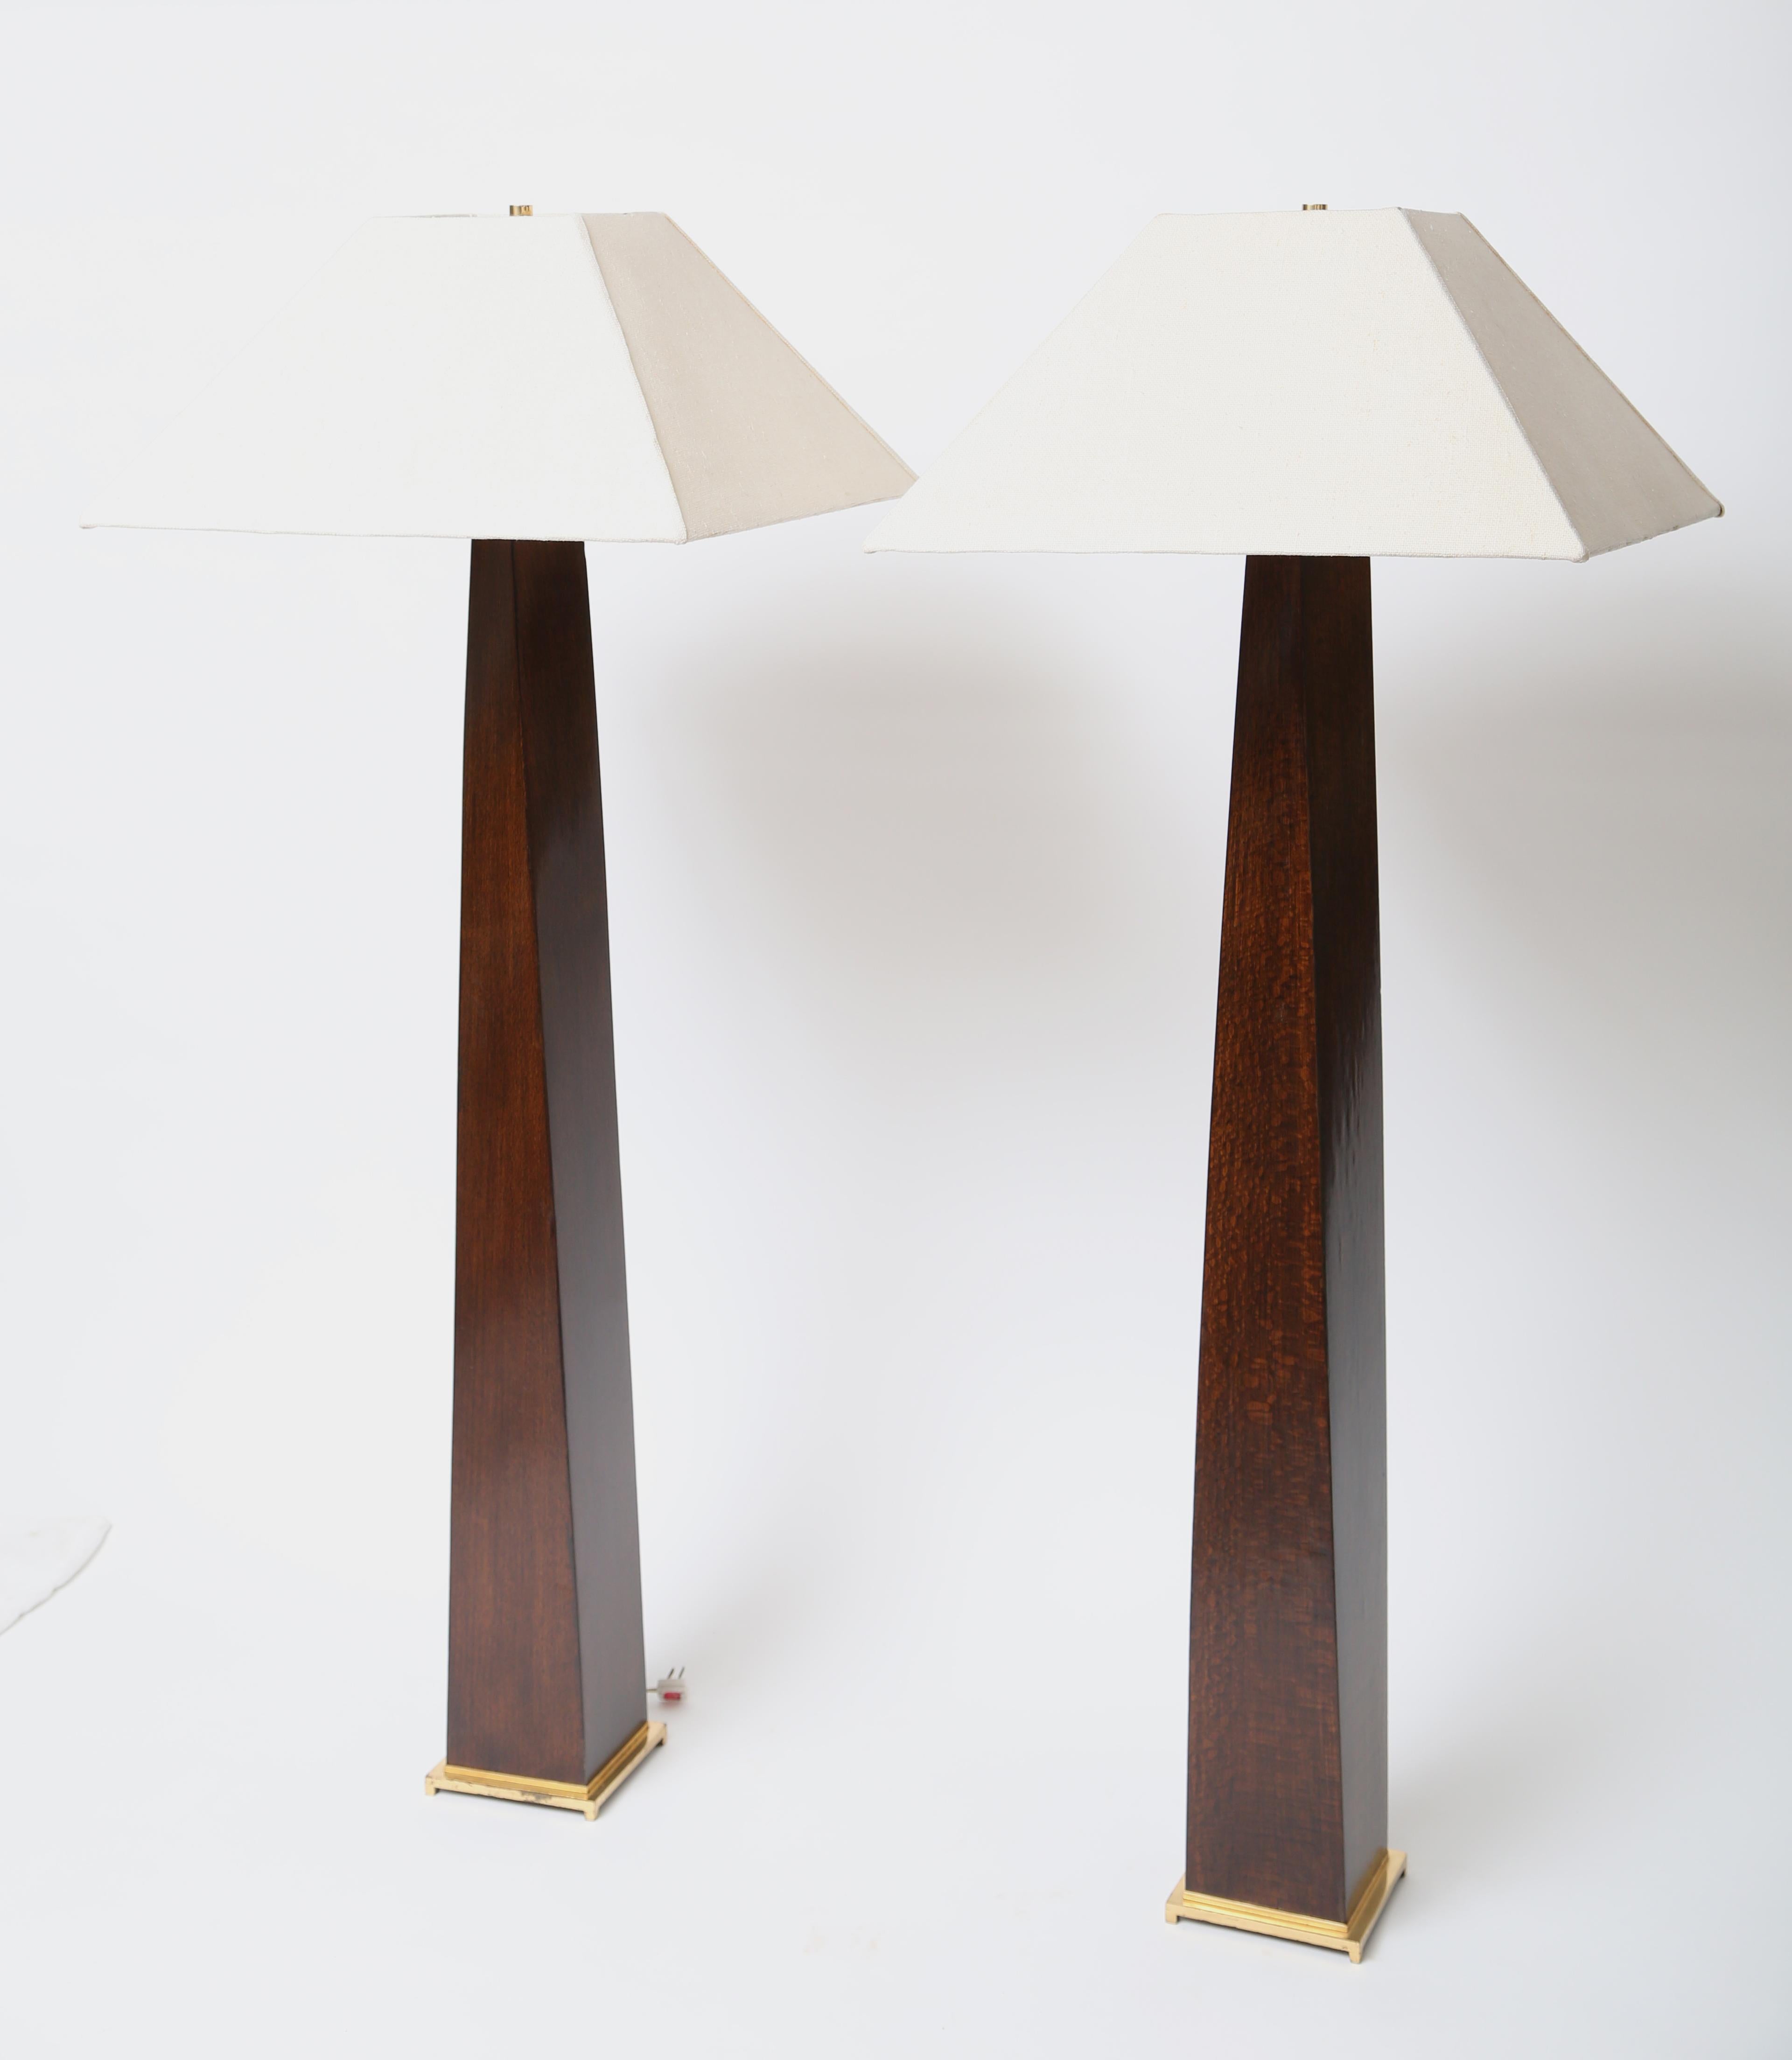 After a classic design by Jean Michel Frank
The use of exotic wood and gold-toned lamp fittings set Karl Springer's
work apart from his peers.